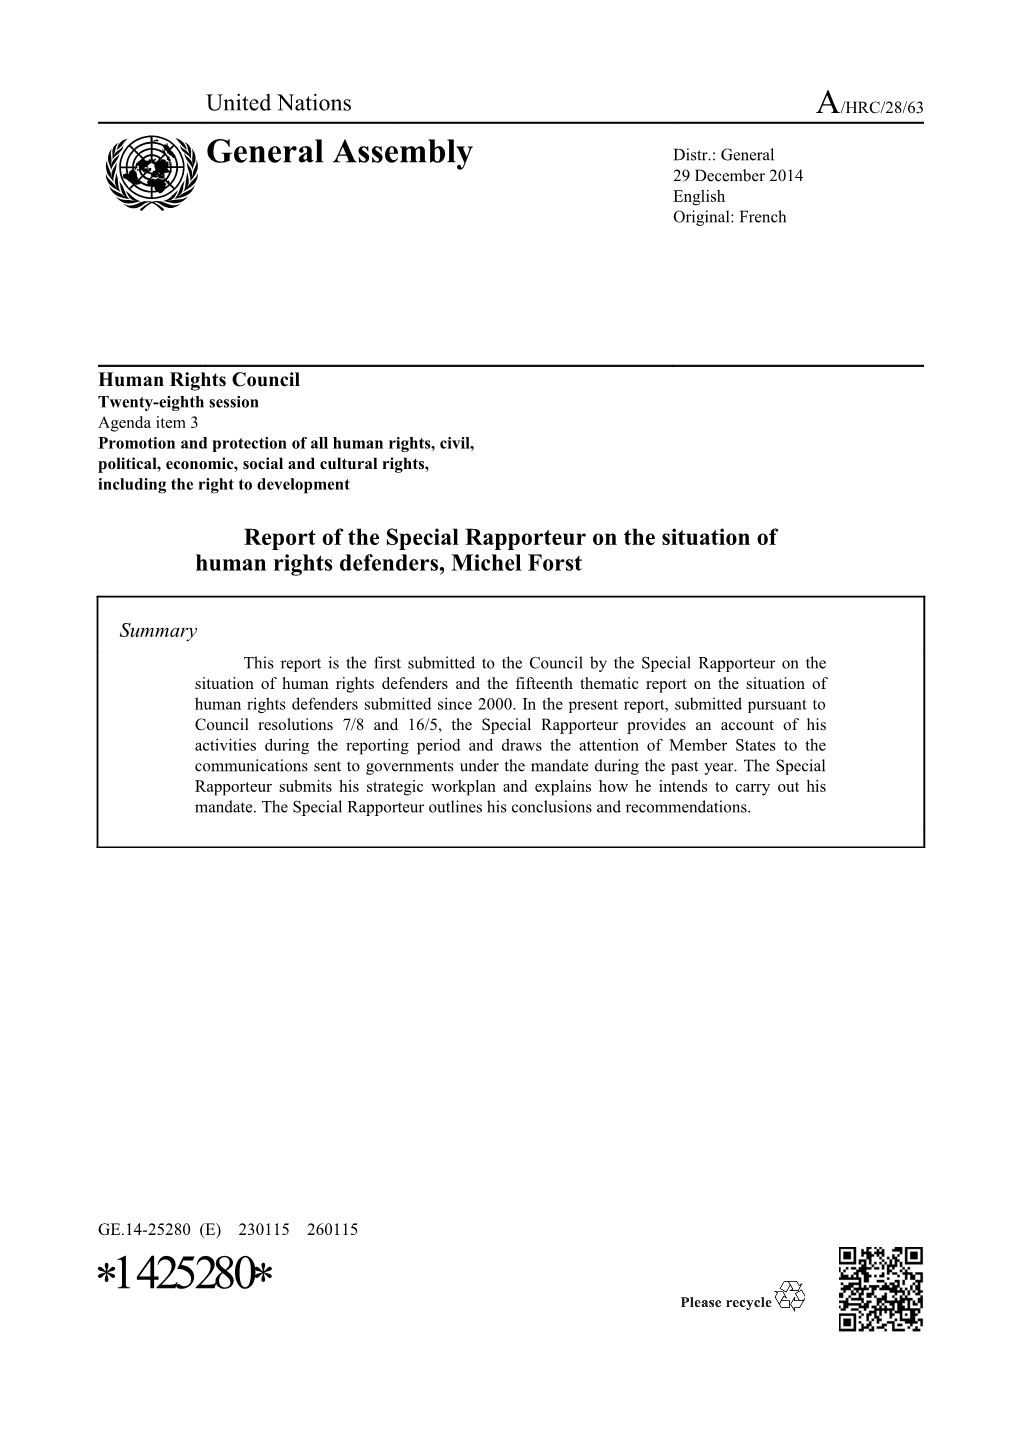 Report of the Special Rapporteur on the Situation of Human Rights Defenders, Michel Forst